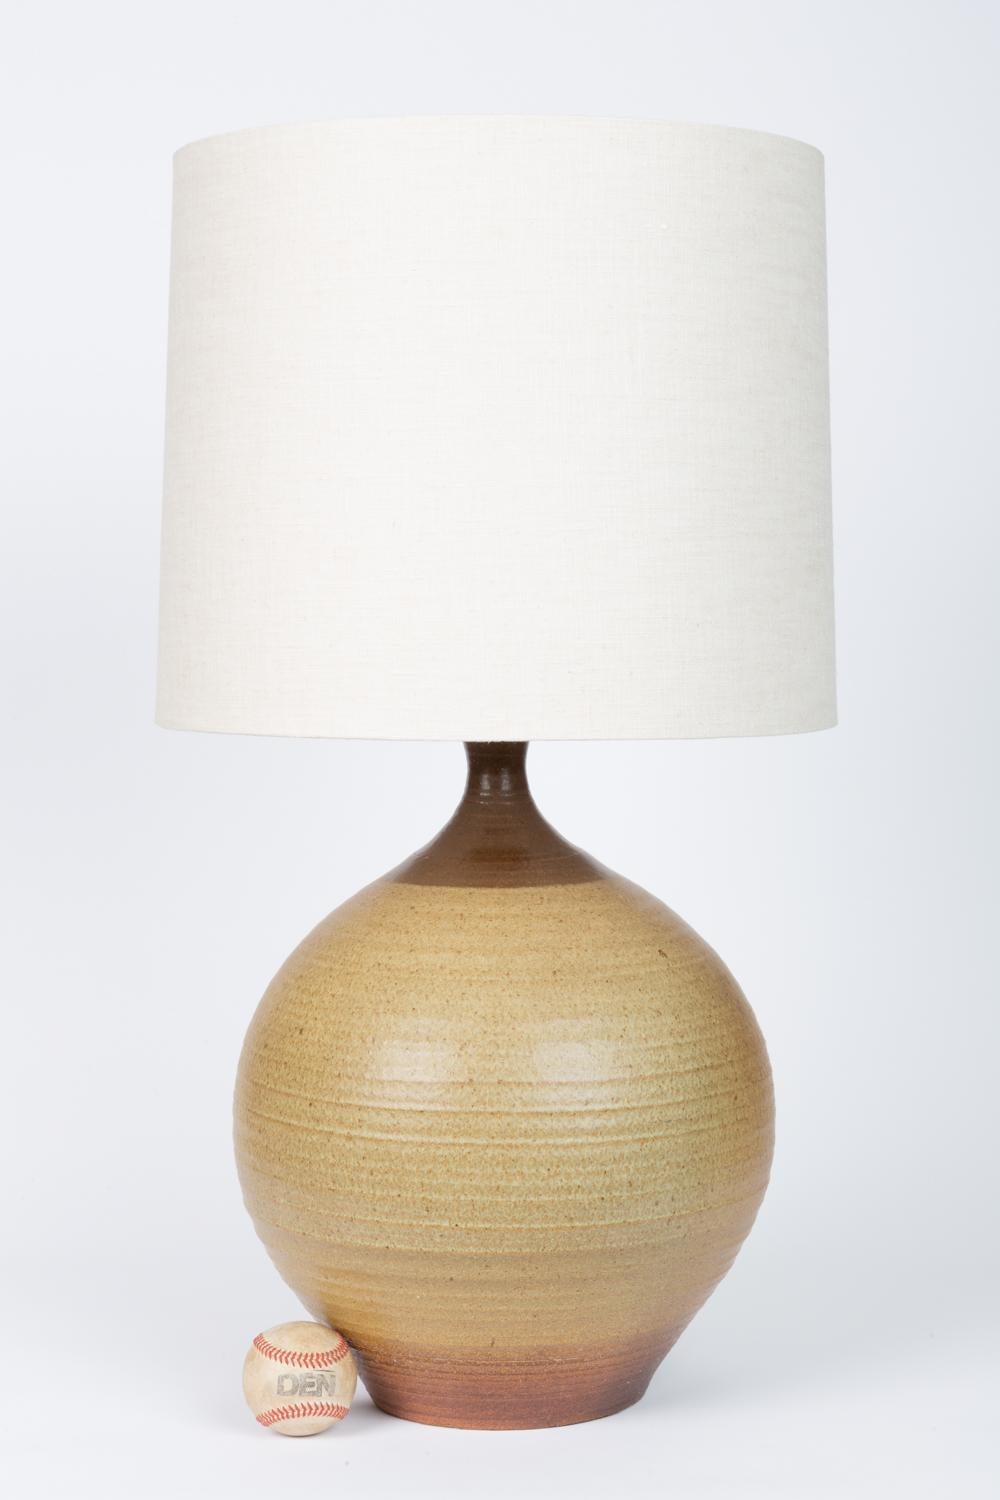 A large stoneware lamp by California ceramicist Bob Kinzie for his company, affiliated craftsmen. The wheel-thrown curved body of the ceramic lamp is lightly ribbed in texture and has a brown color-blocked band at the base and where the vessel